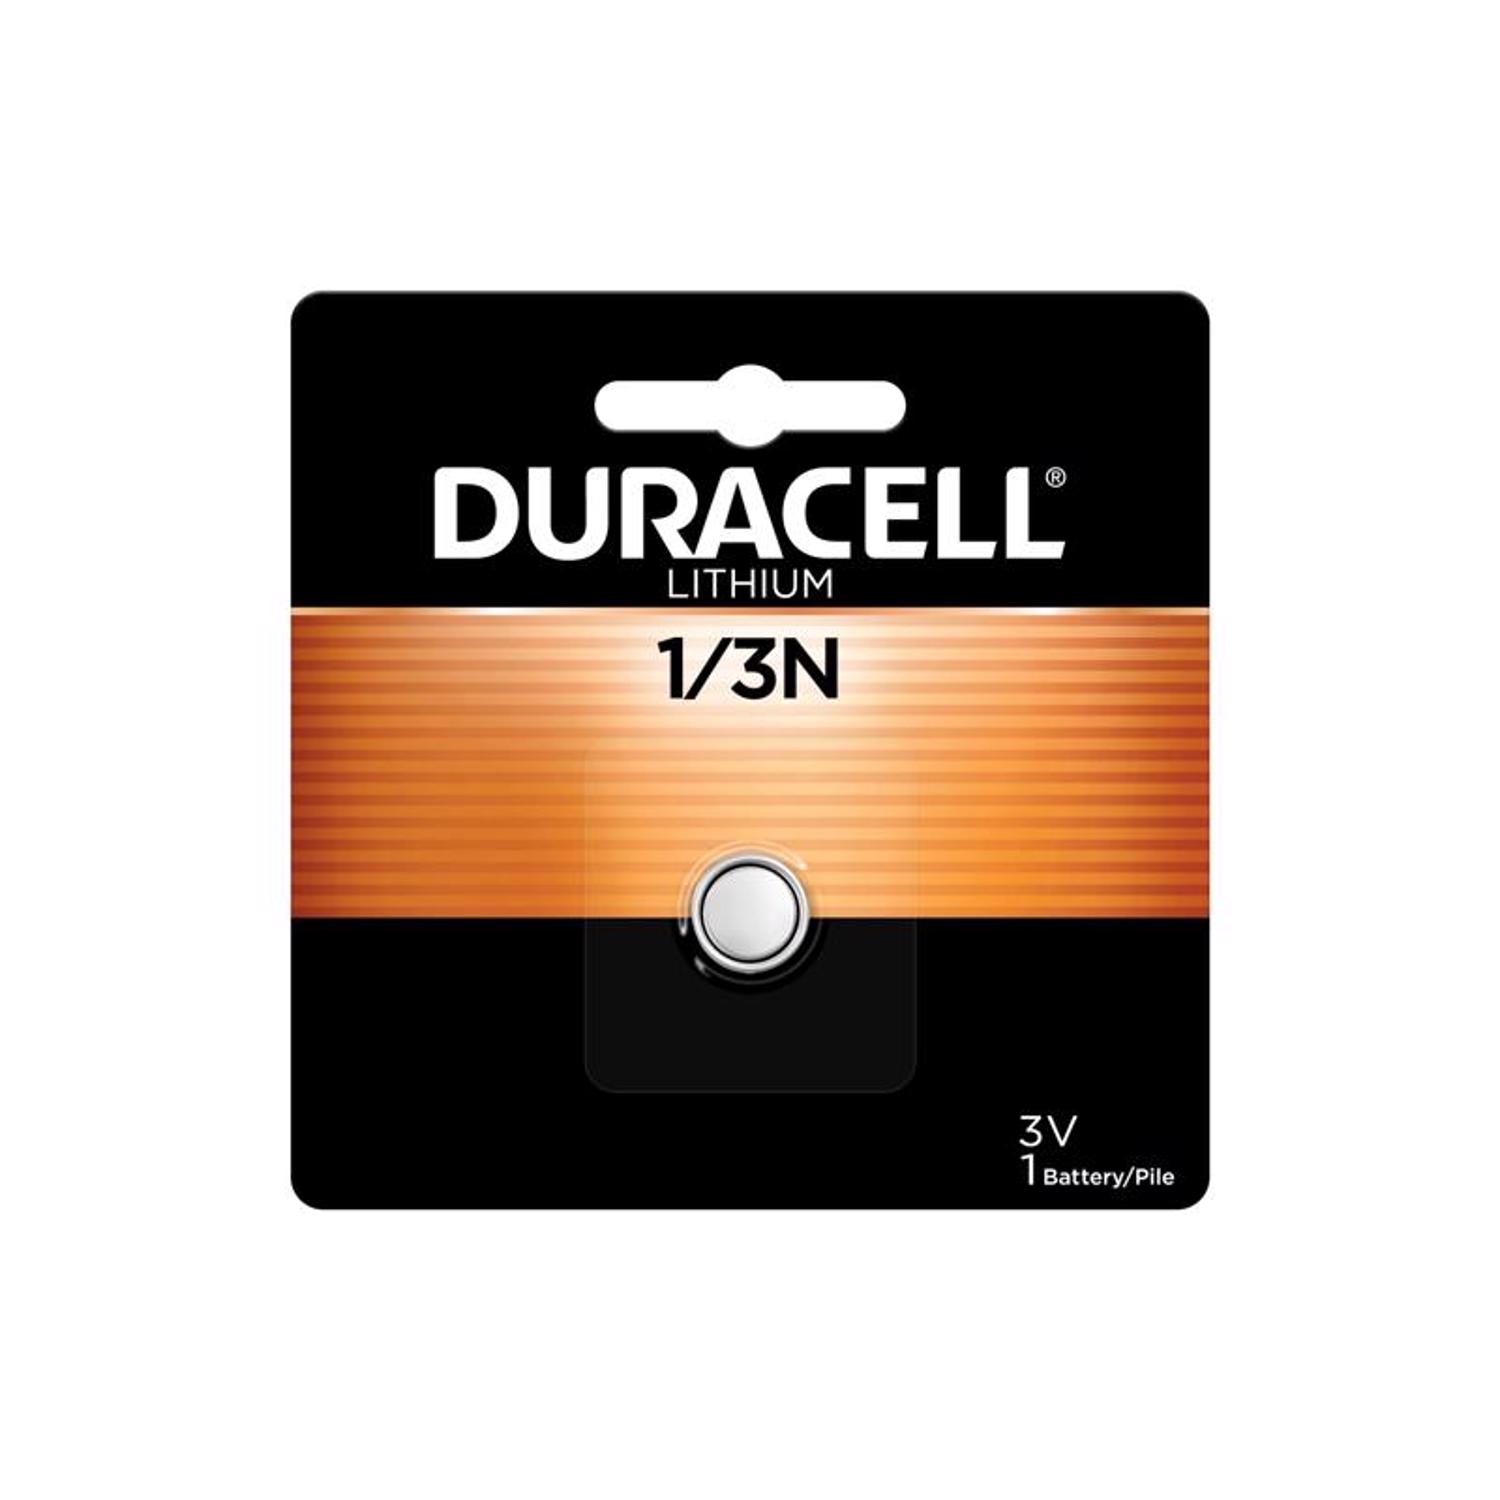 5 x Energizer + 5 x Duracell CR2032 3 Volt Lithium Coin Cell Batteries (10  Total)